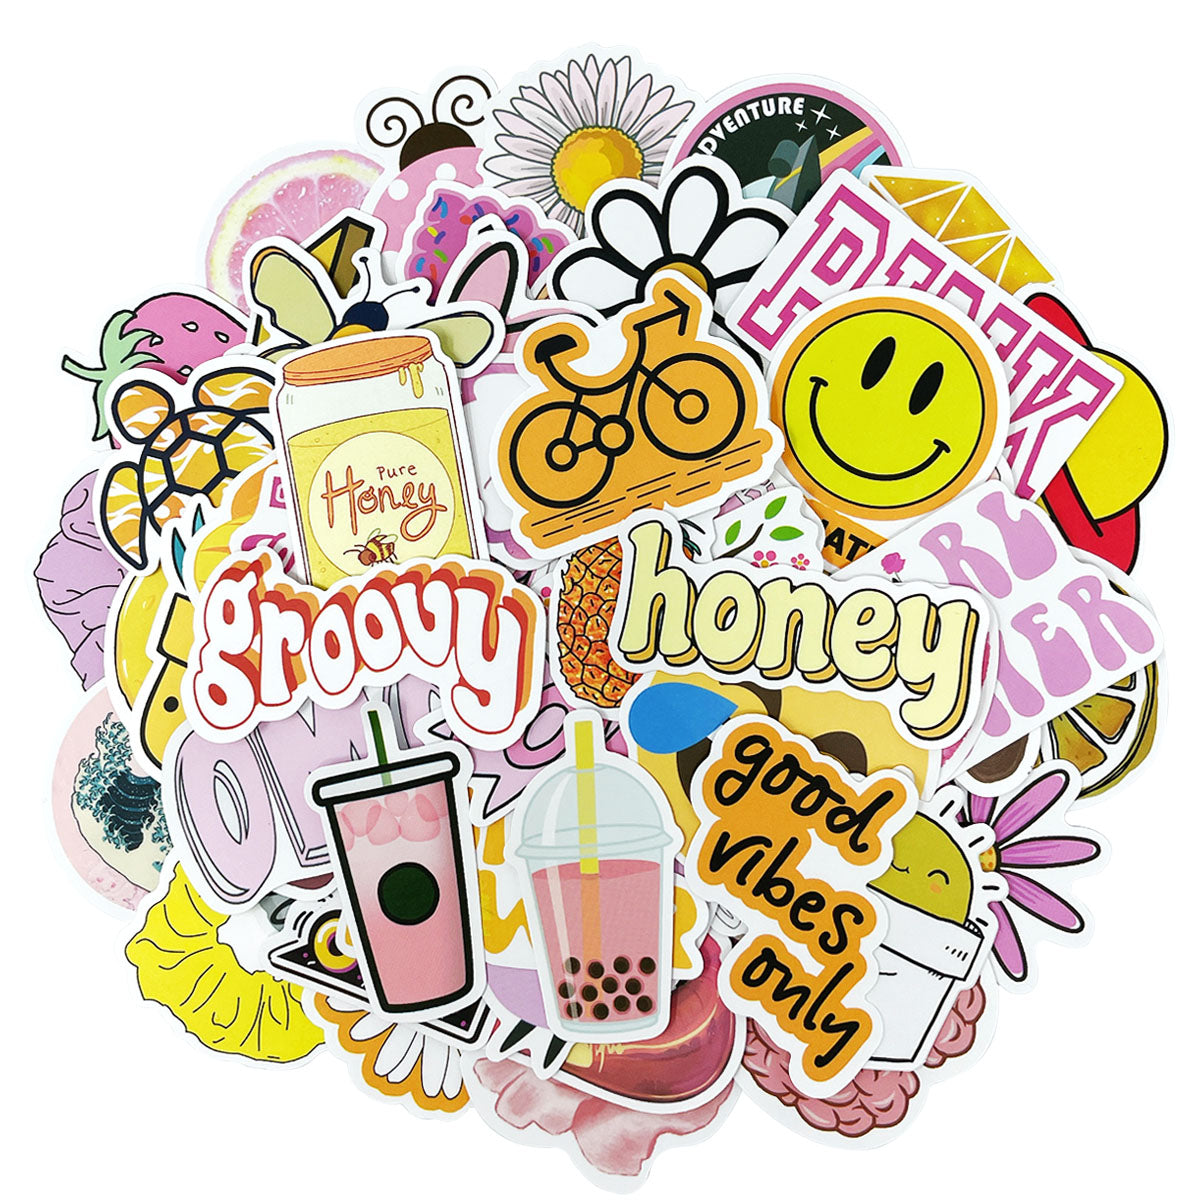 Wrapables Waterproof Vinyl Stickers for Water Bottles, Laptop, Phones, Skateboards, Decals for Teens 100pcs Wedding